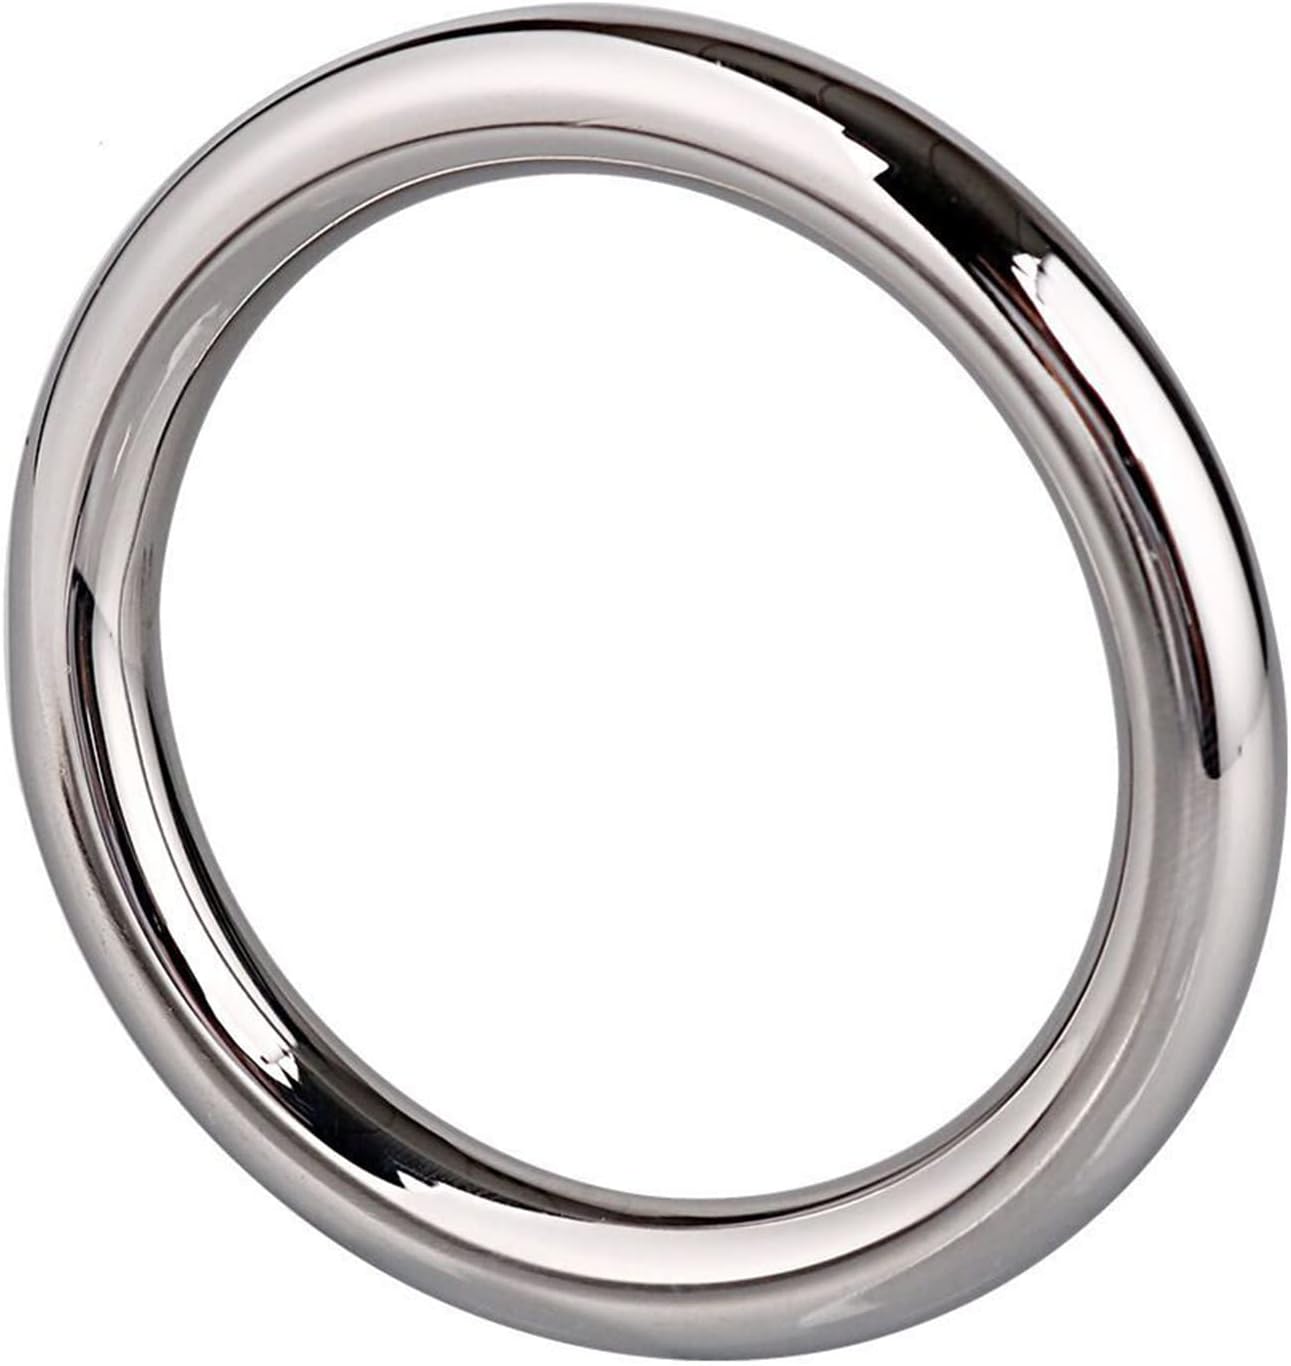 Stainless Steel Penis Cock Rings Review